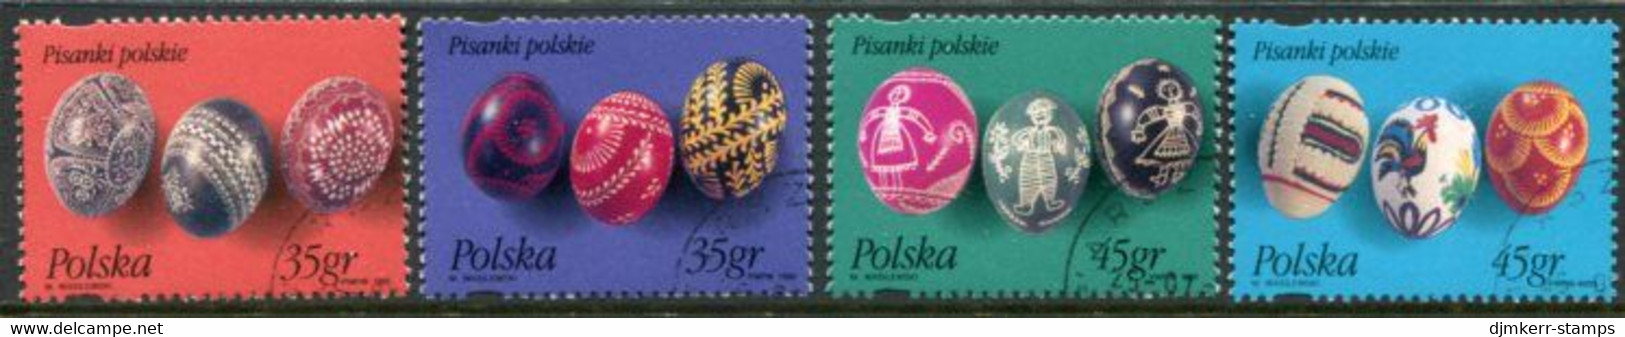 POLAND 1995 Decorated Easter Eggs Used.  Michel 3526-29 - Usados